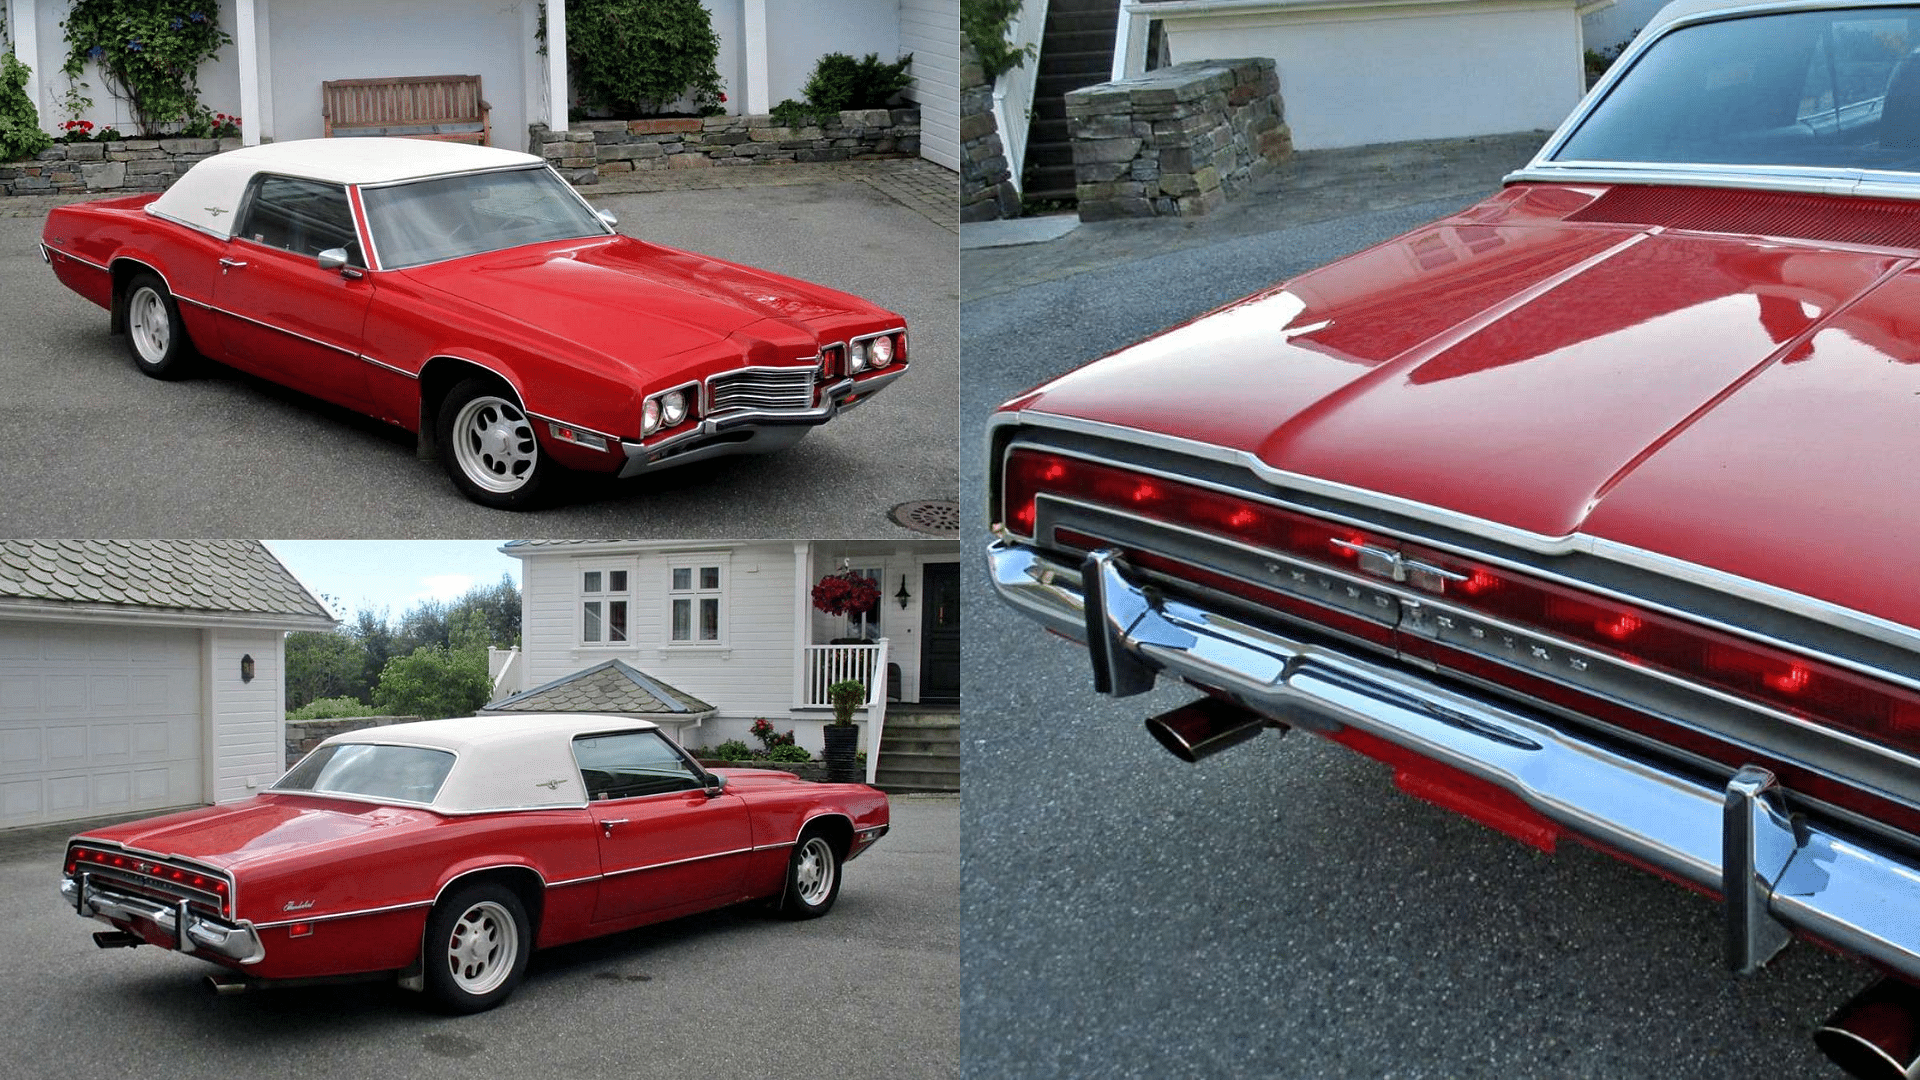 The 1971 Ford Thunderbird front and rear view